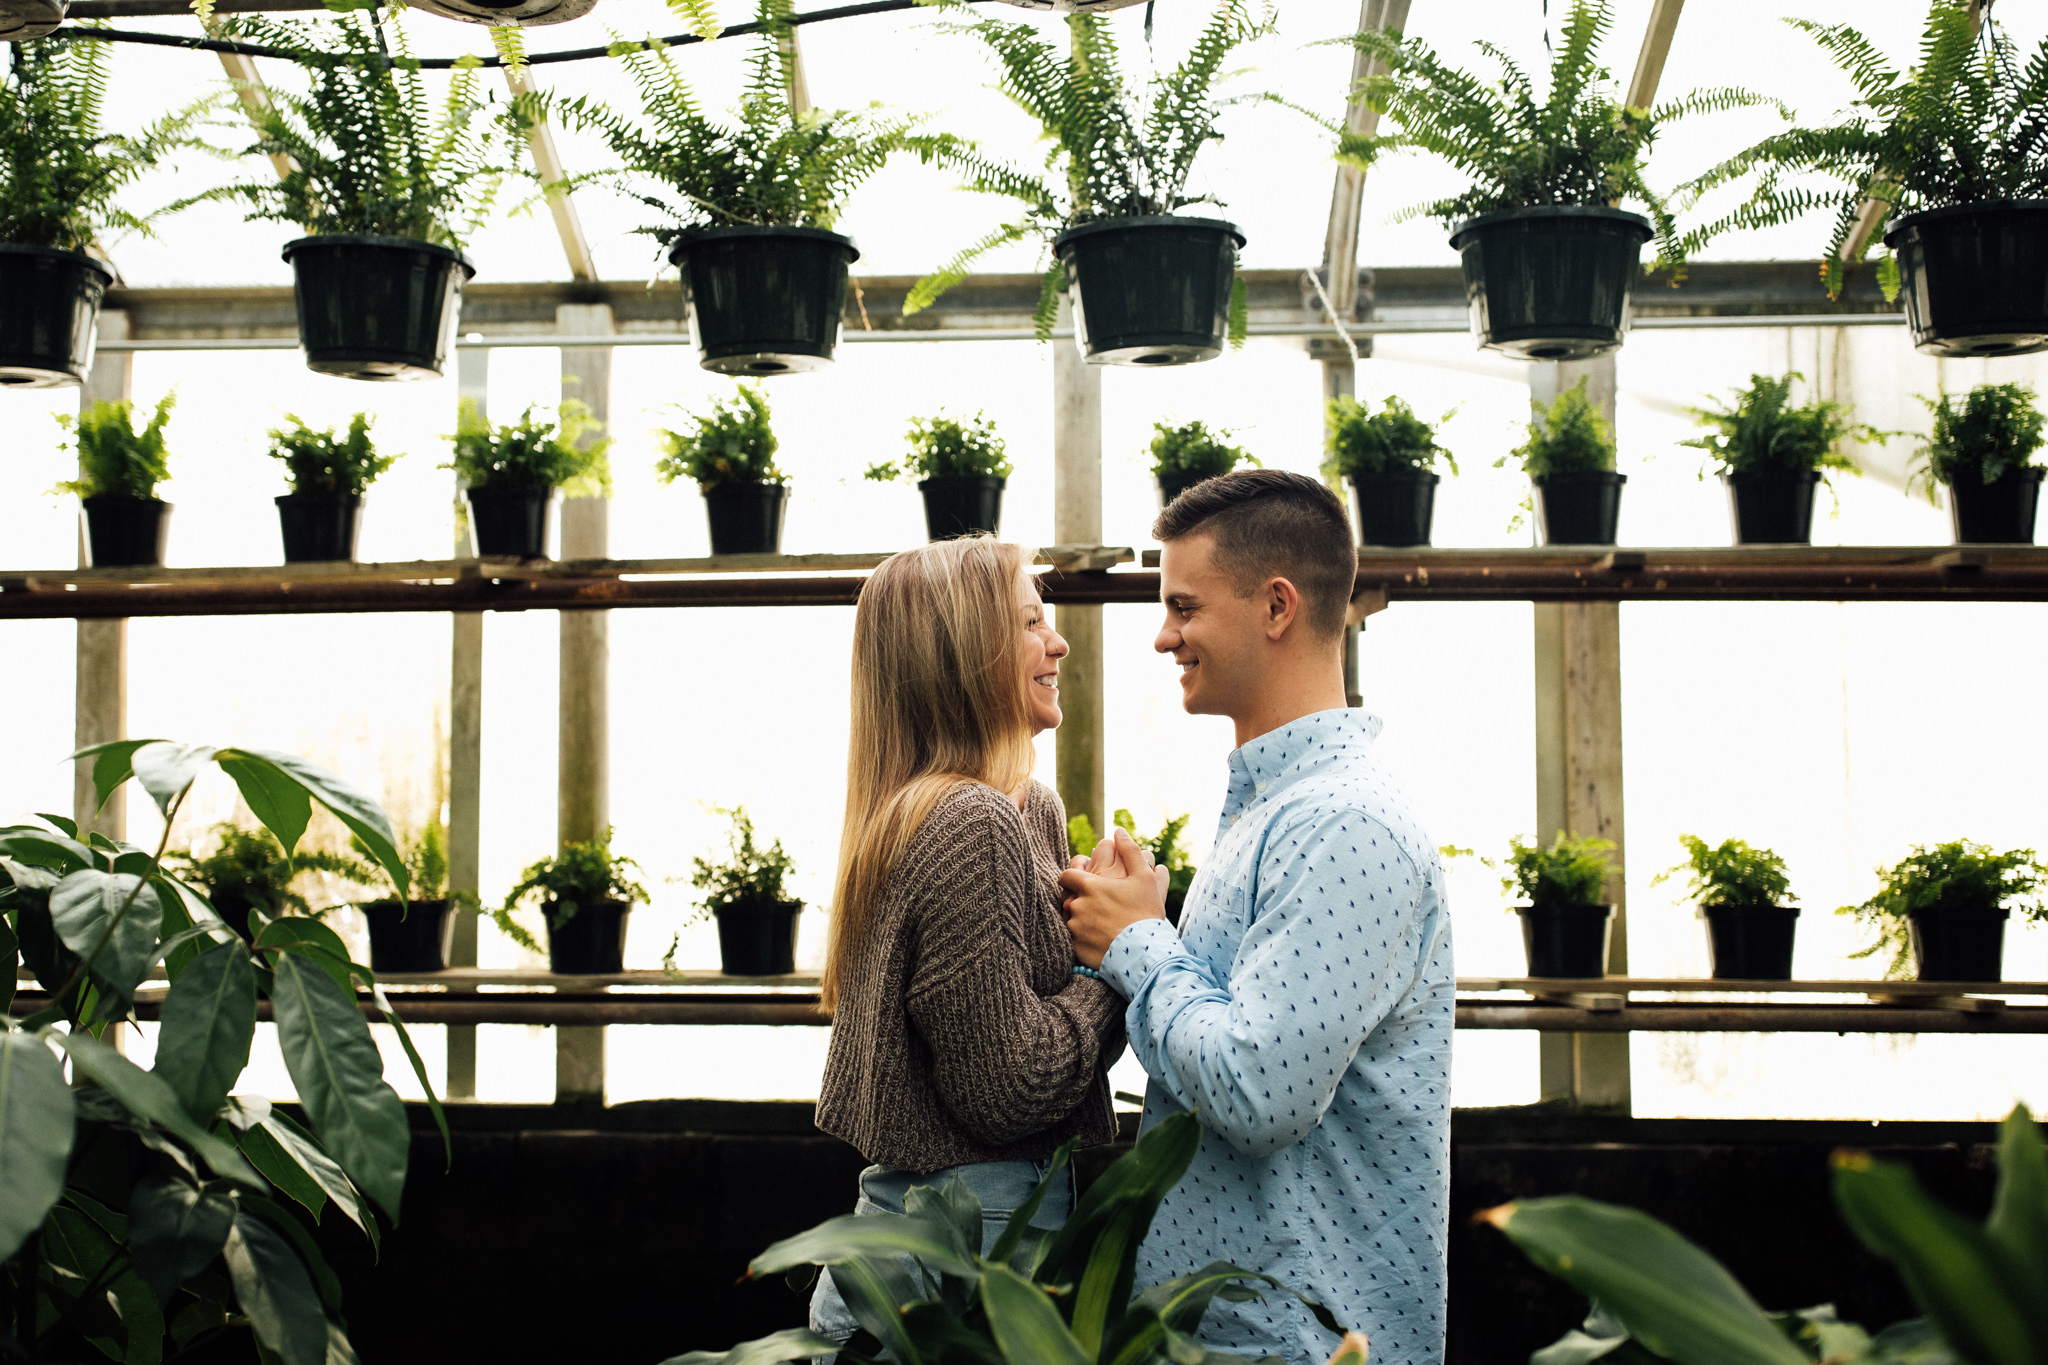 memphis-engagement-photographer-thewarmtharoundyou-greenhouse-engagement-pictures (33 of 118).jpg